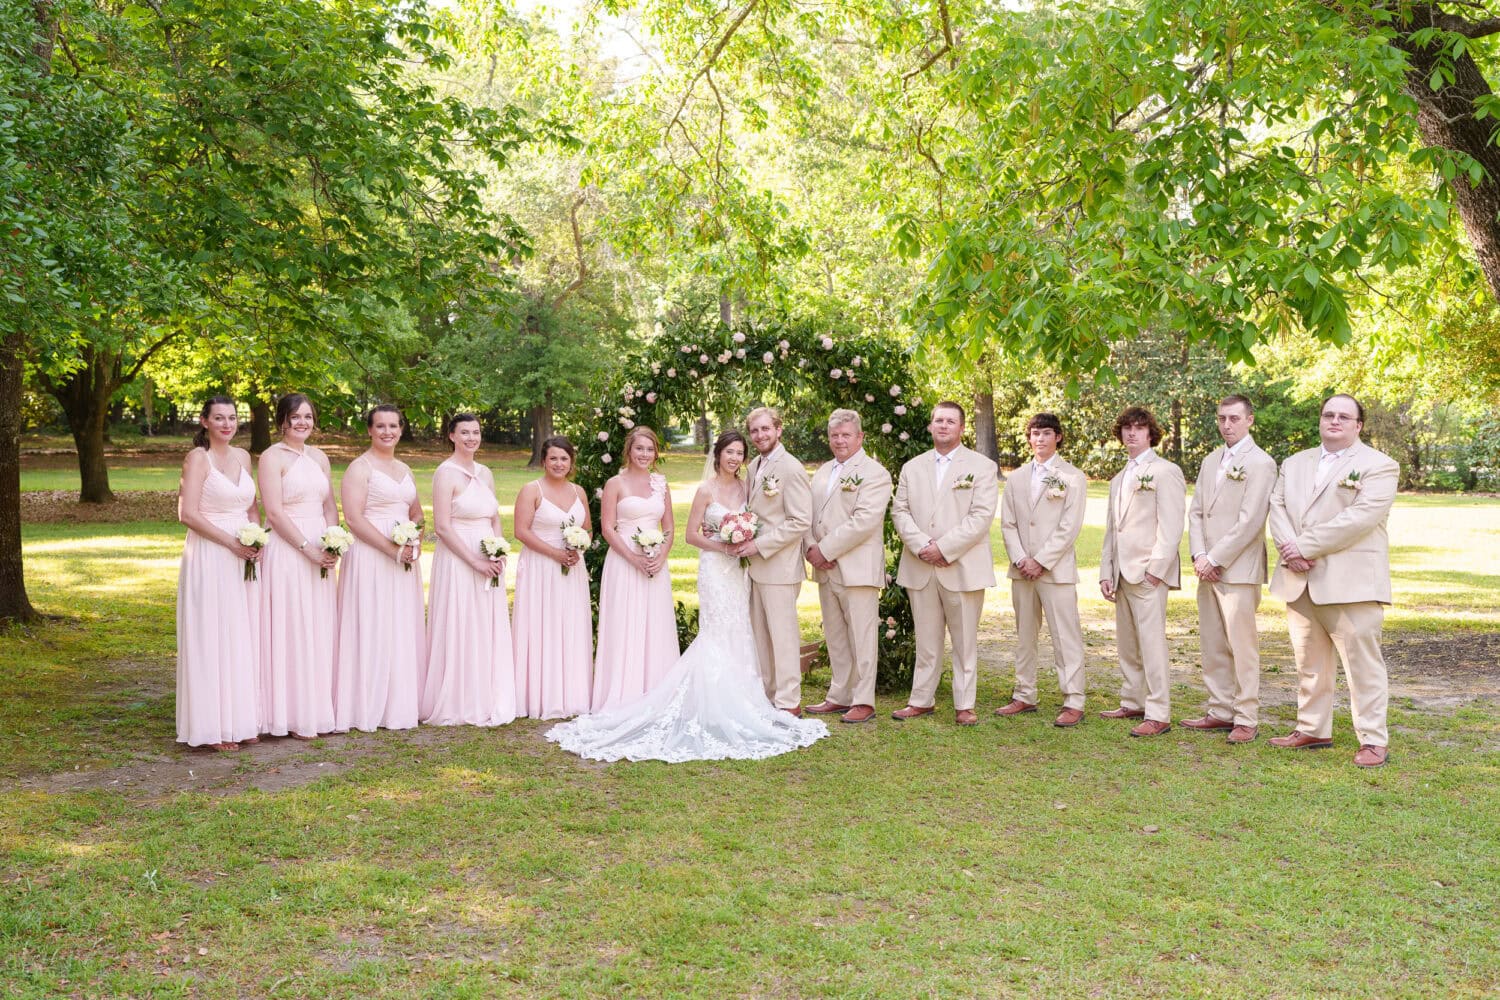 Big wedding party under the trees - Tanglewood Plantation